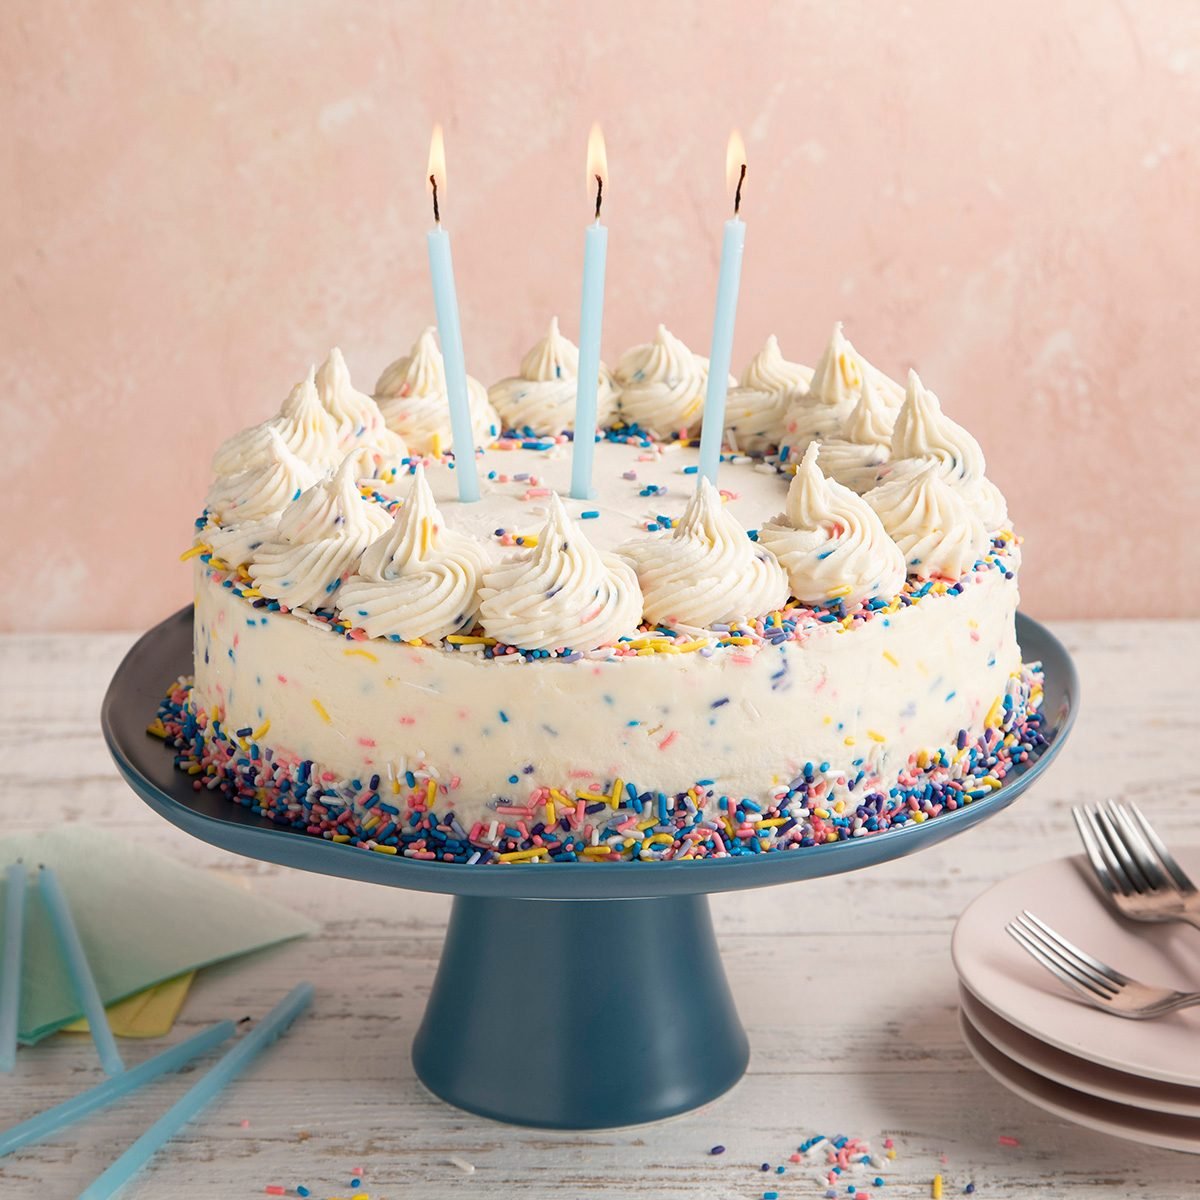 Savvy tips for pulling together a sweet showstopper birthday cake for less